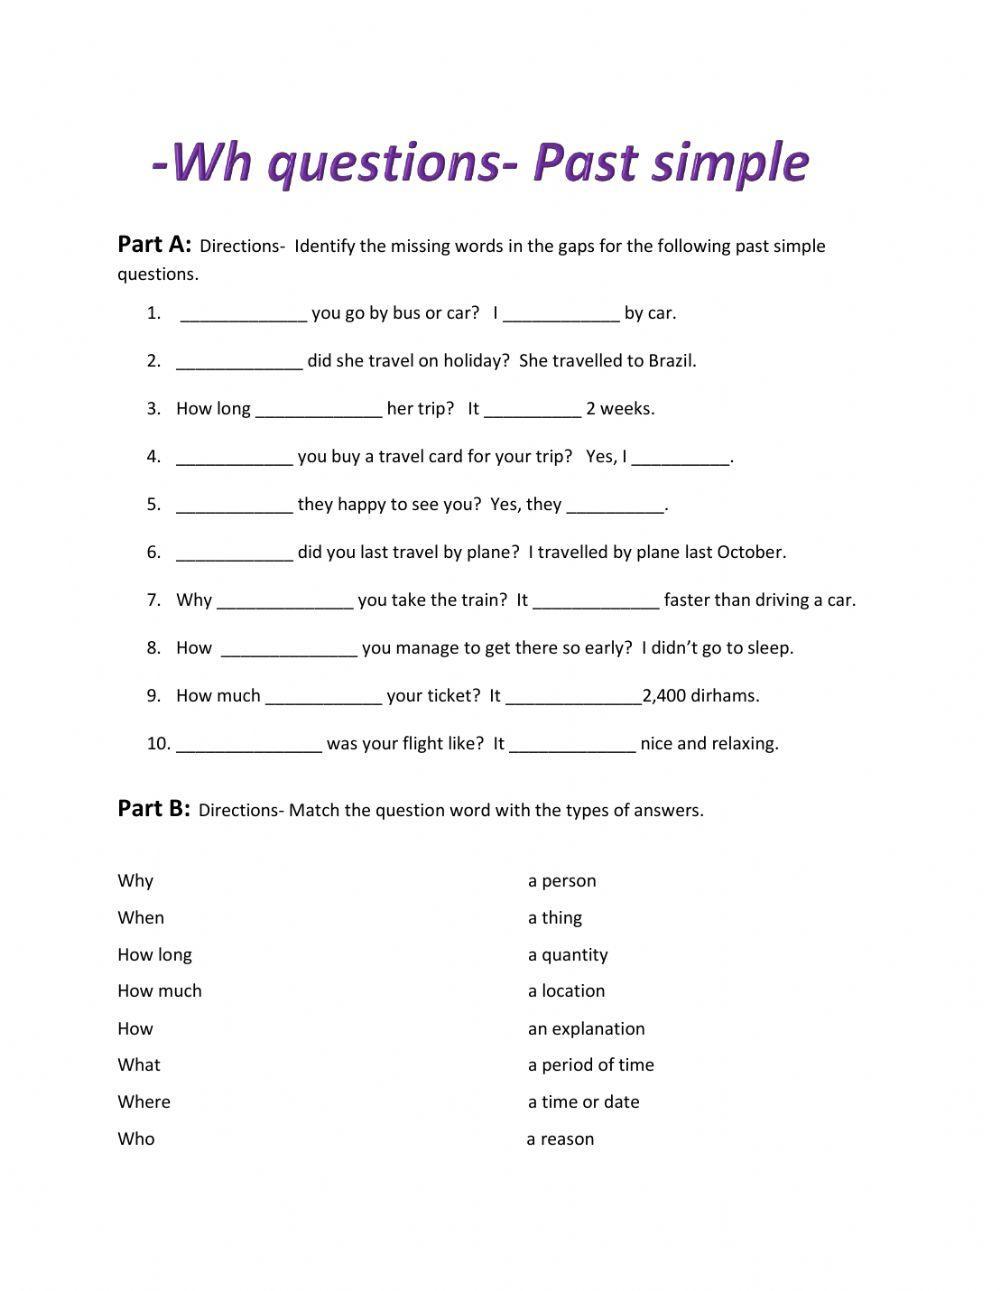 Past Simple Questions with Wh-words